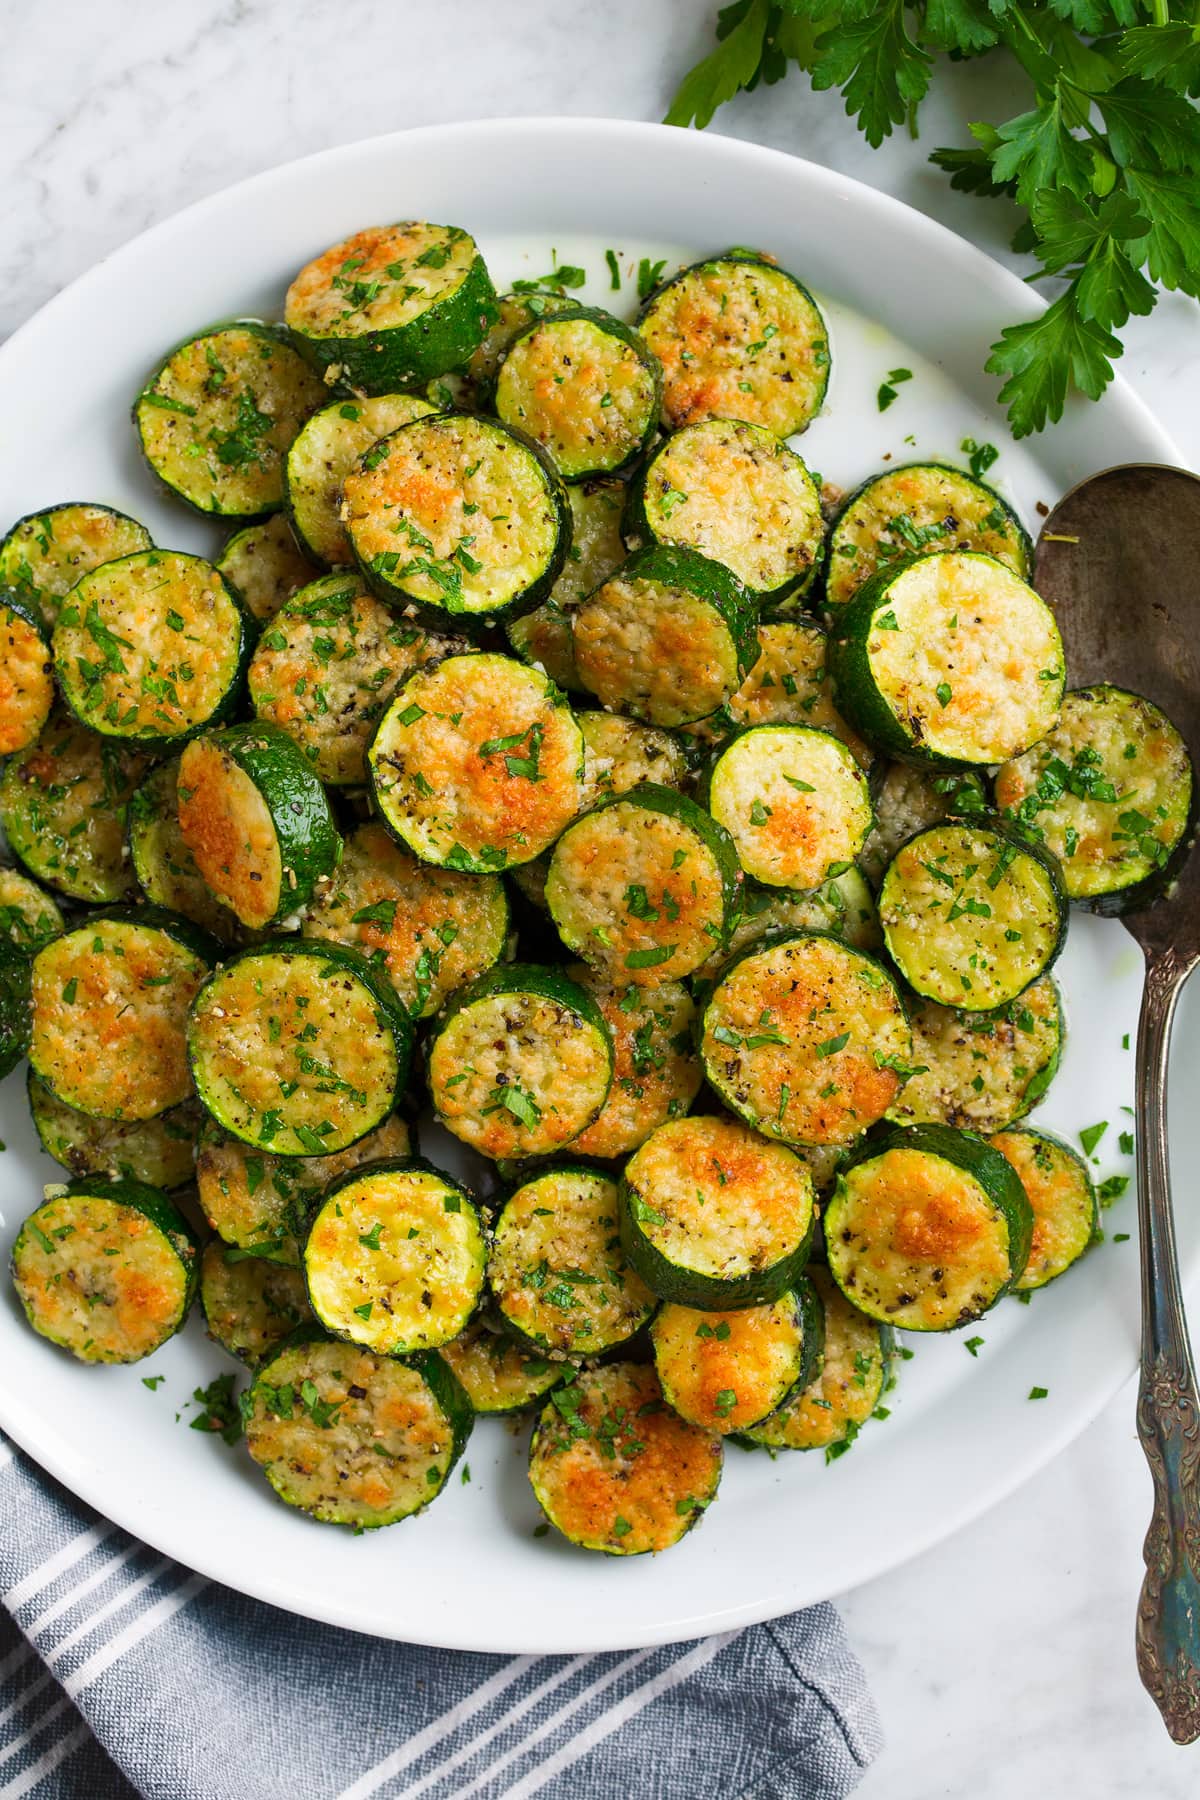 Baked zucchini coins topped with Parmesan displayed high on a white plate.